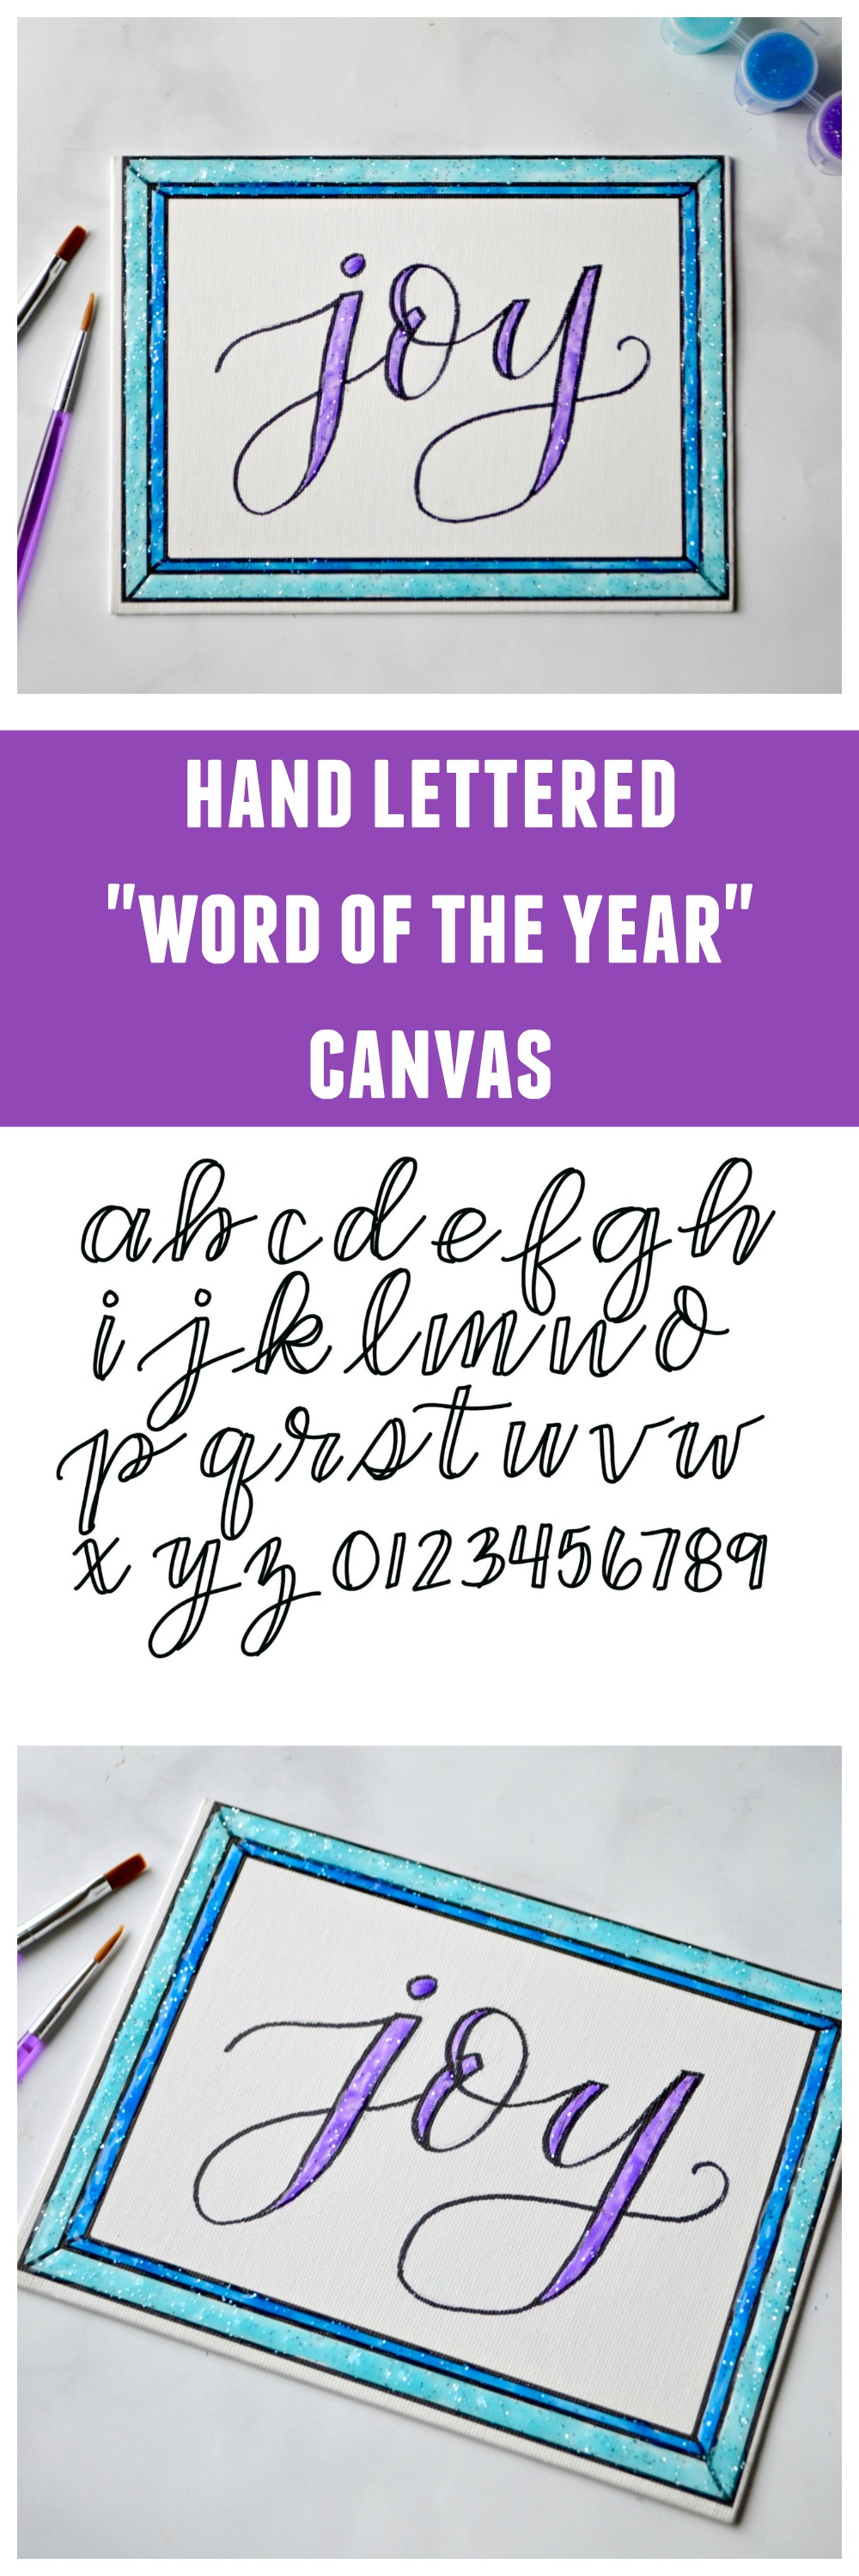 Hand Lettered Word of the Year Canvas